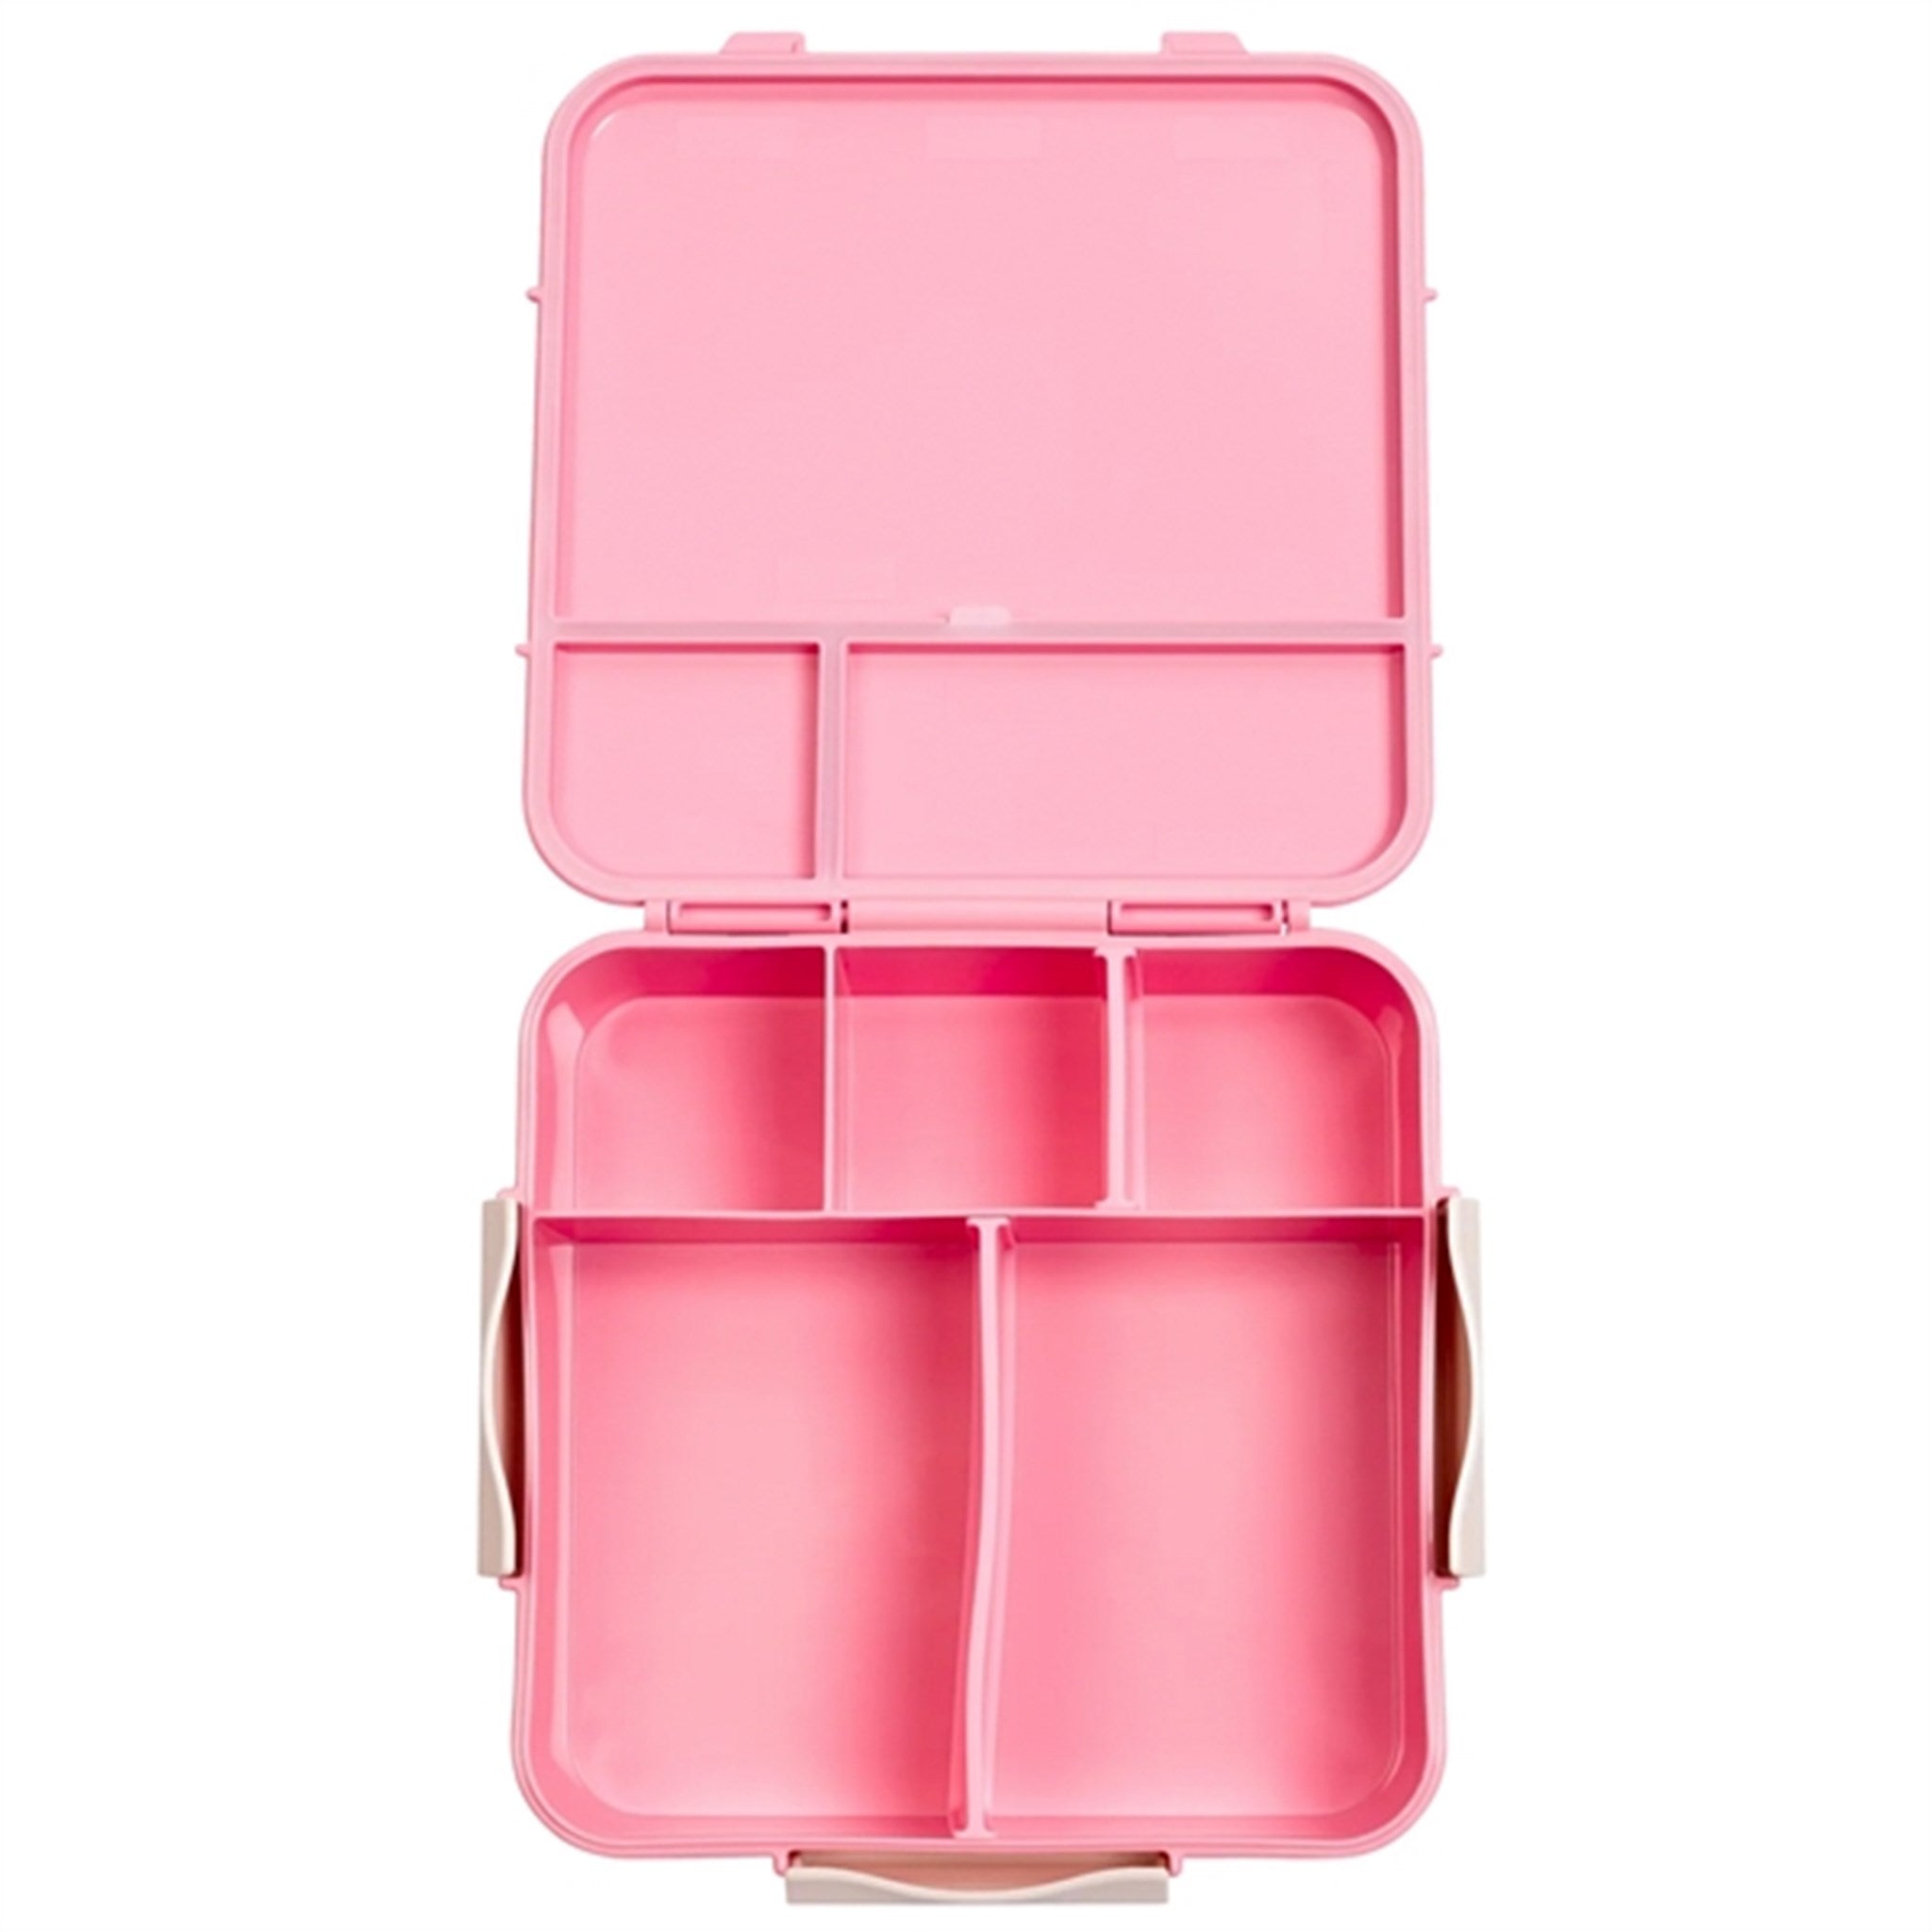 Little Lunch Box Co Bento 3+ Lunch Box Blush Pink 5